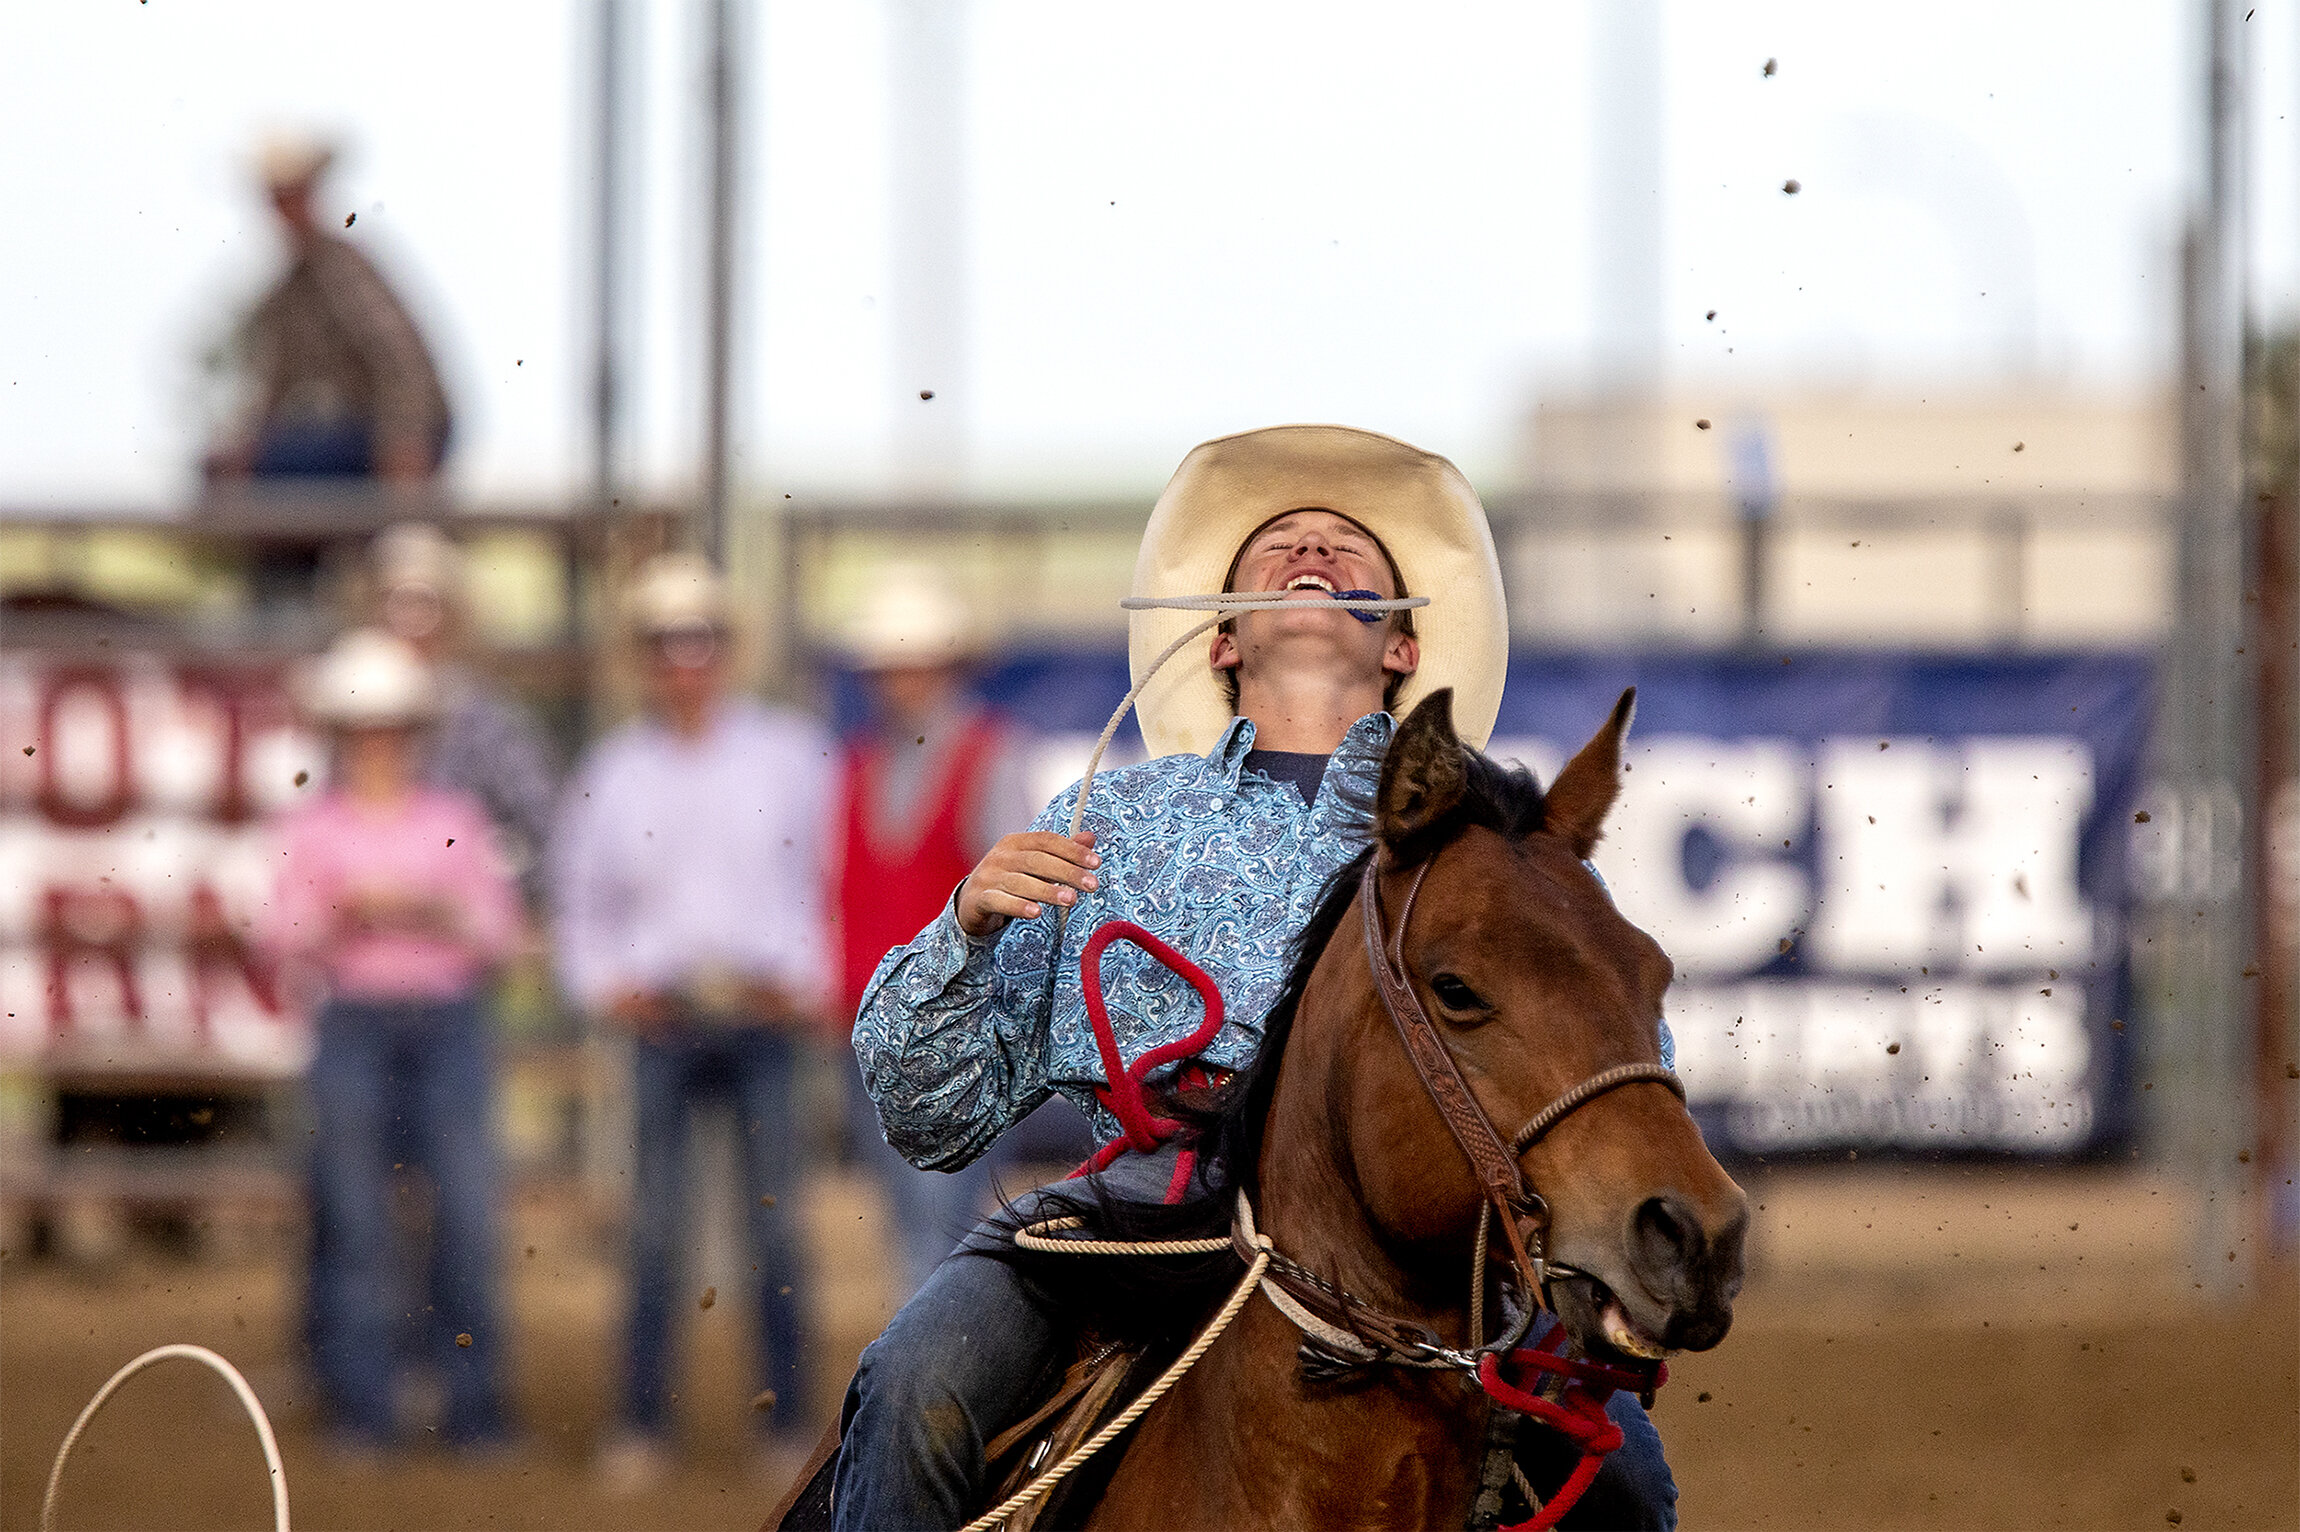  Coy Thar grimaces as his lasso misses the calf's head in the tie down calf roping competition on Thursday, June 6, 2019. 